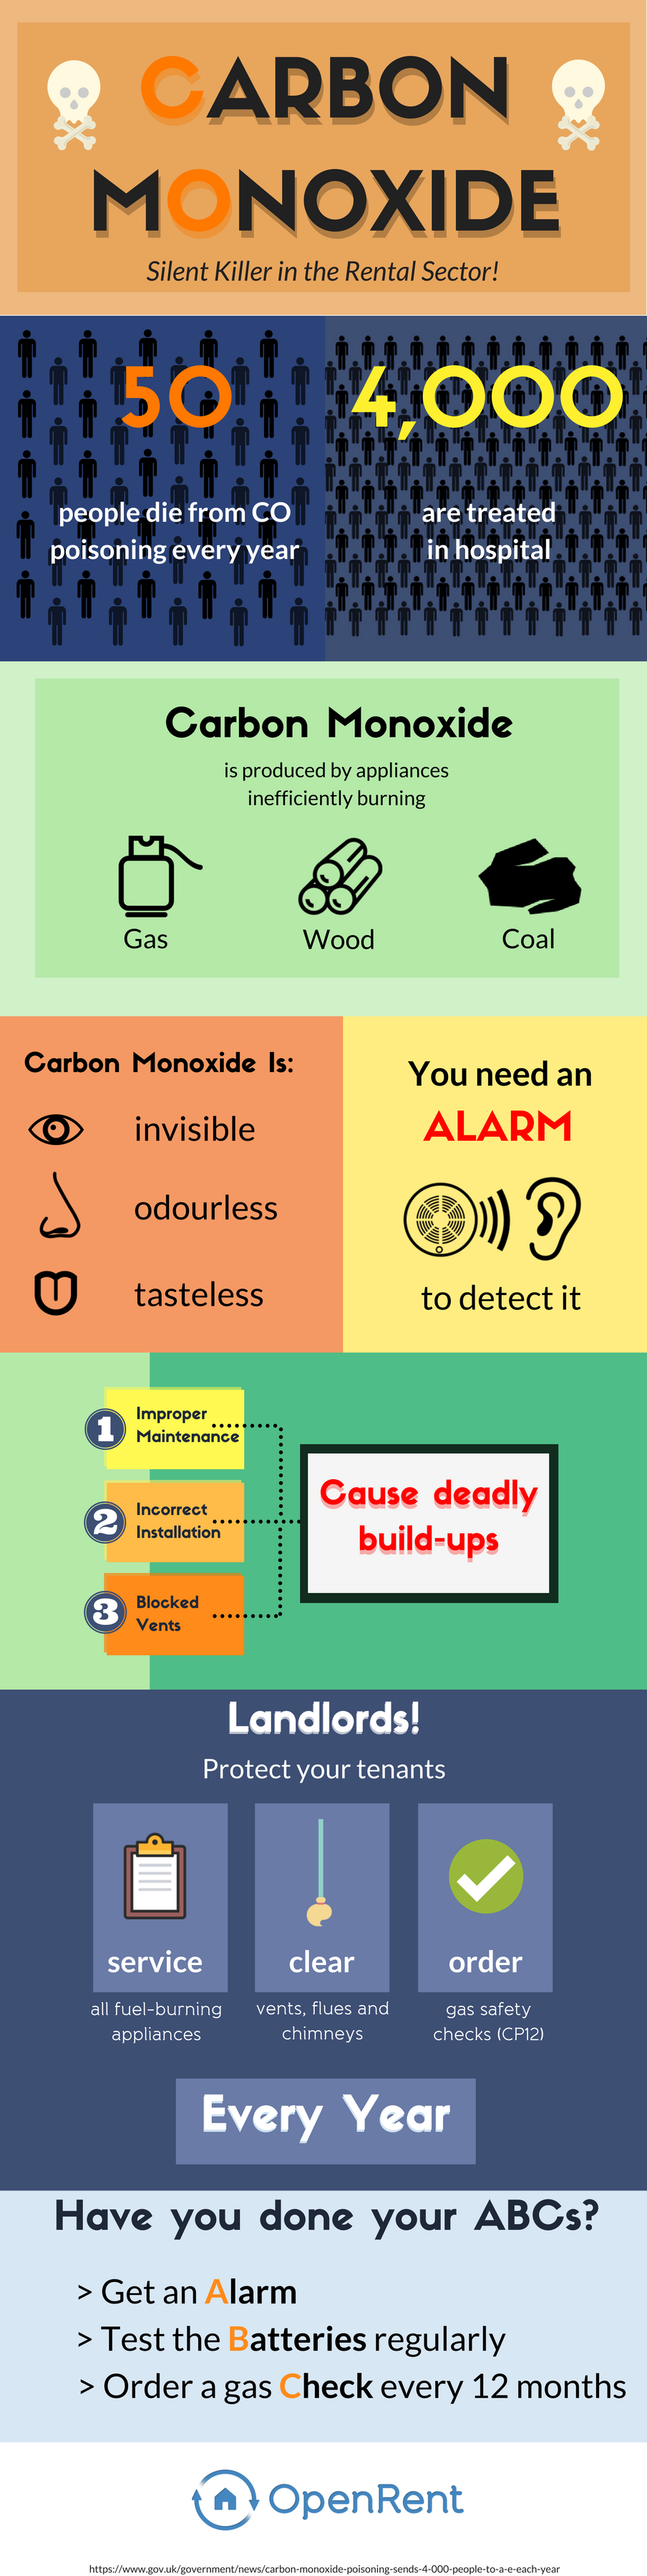 carbon monoxide safety tips infographic CO poisoning